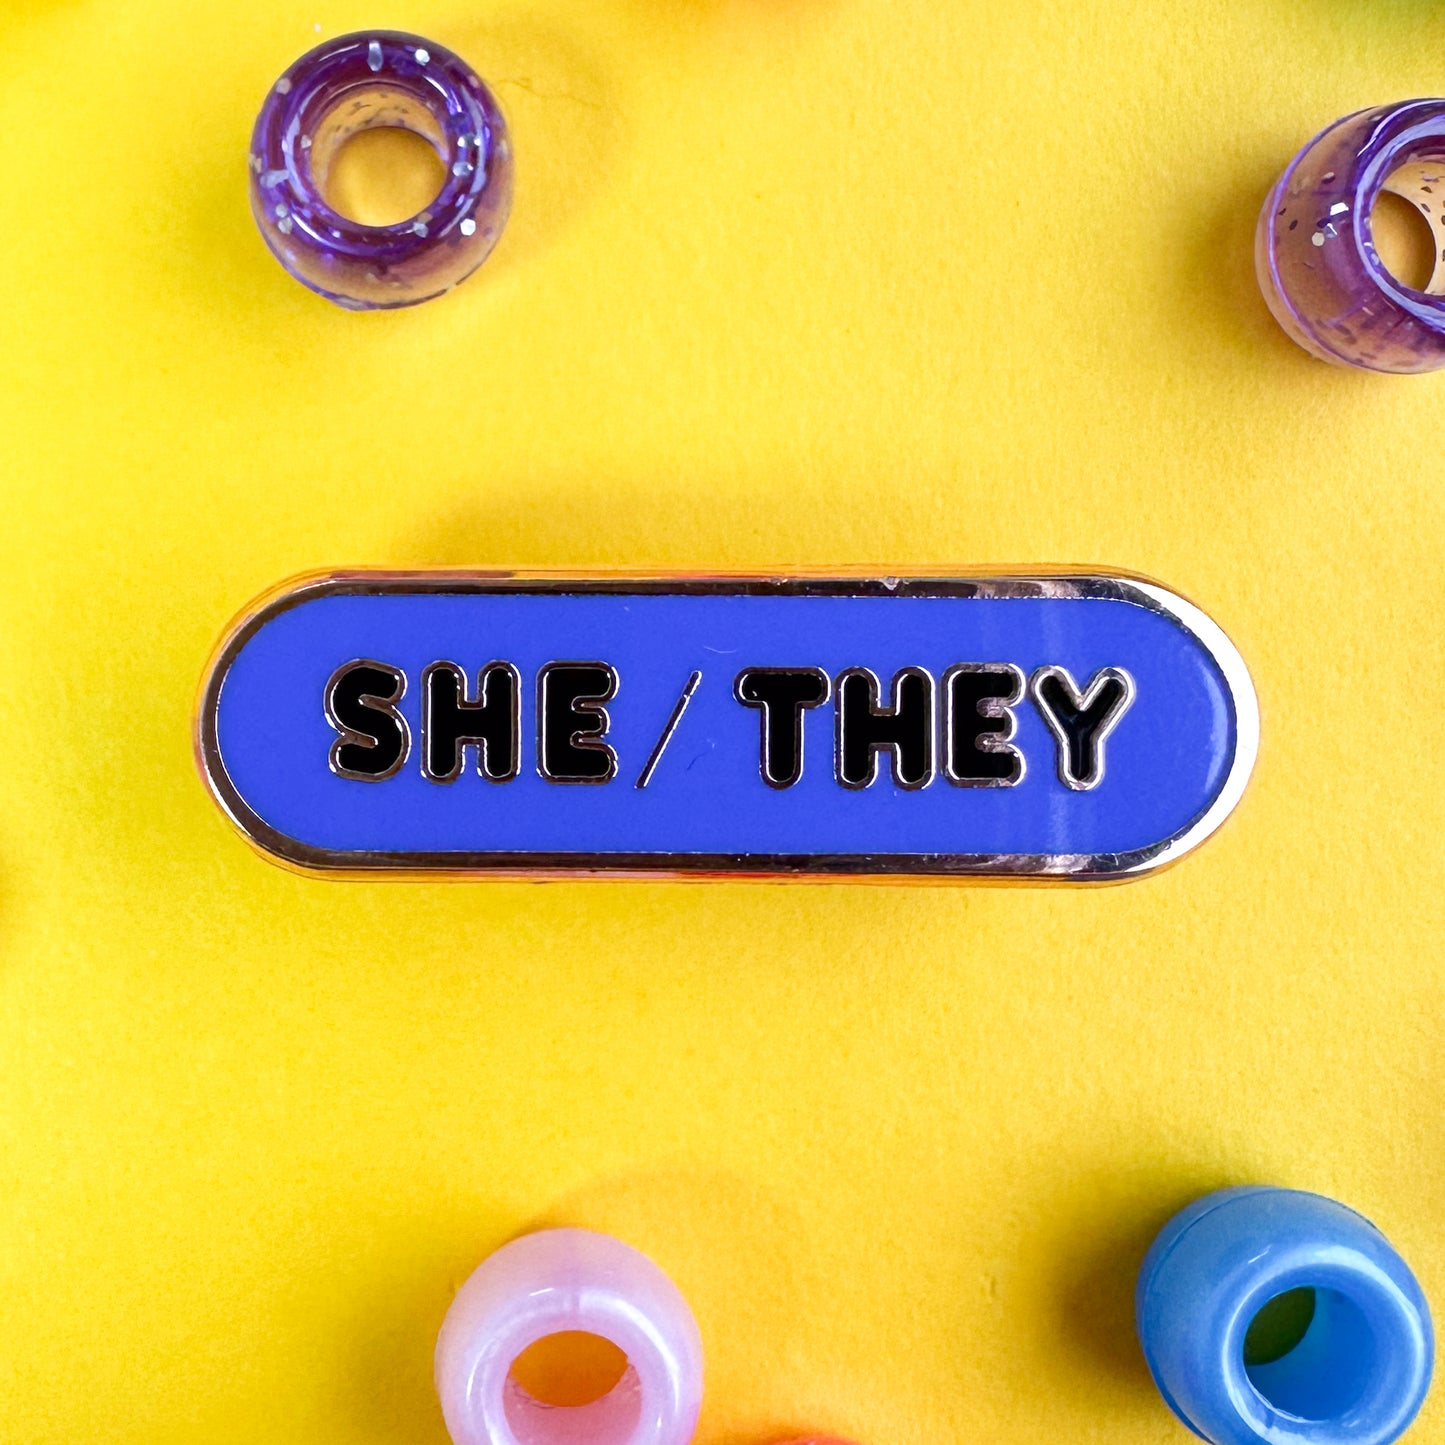 A capsule pin with black letters that read "She/They" on an indigo background. The pin is on a yellow background with blue, pink, and purple pony beads around it. 